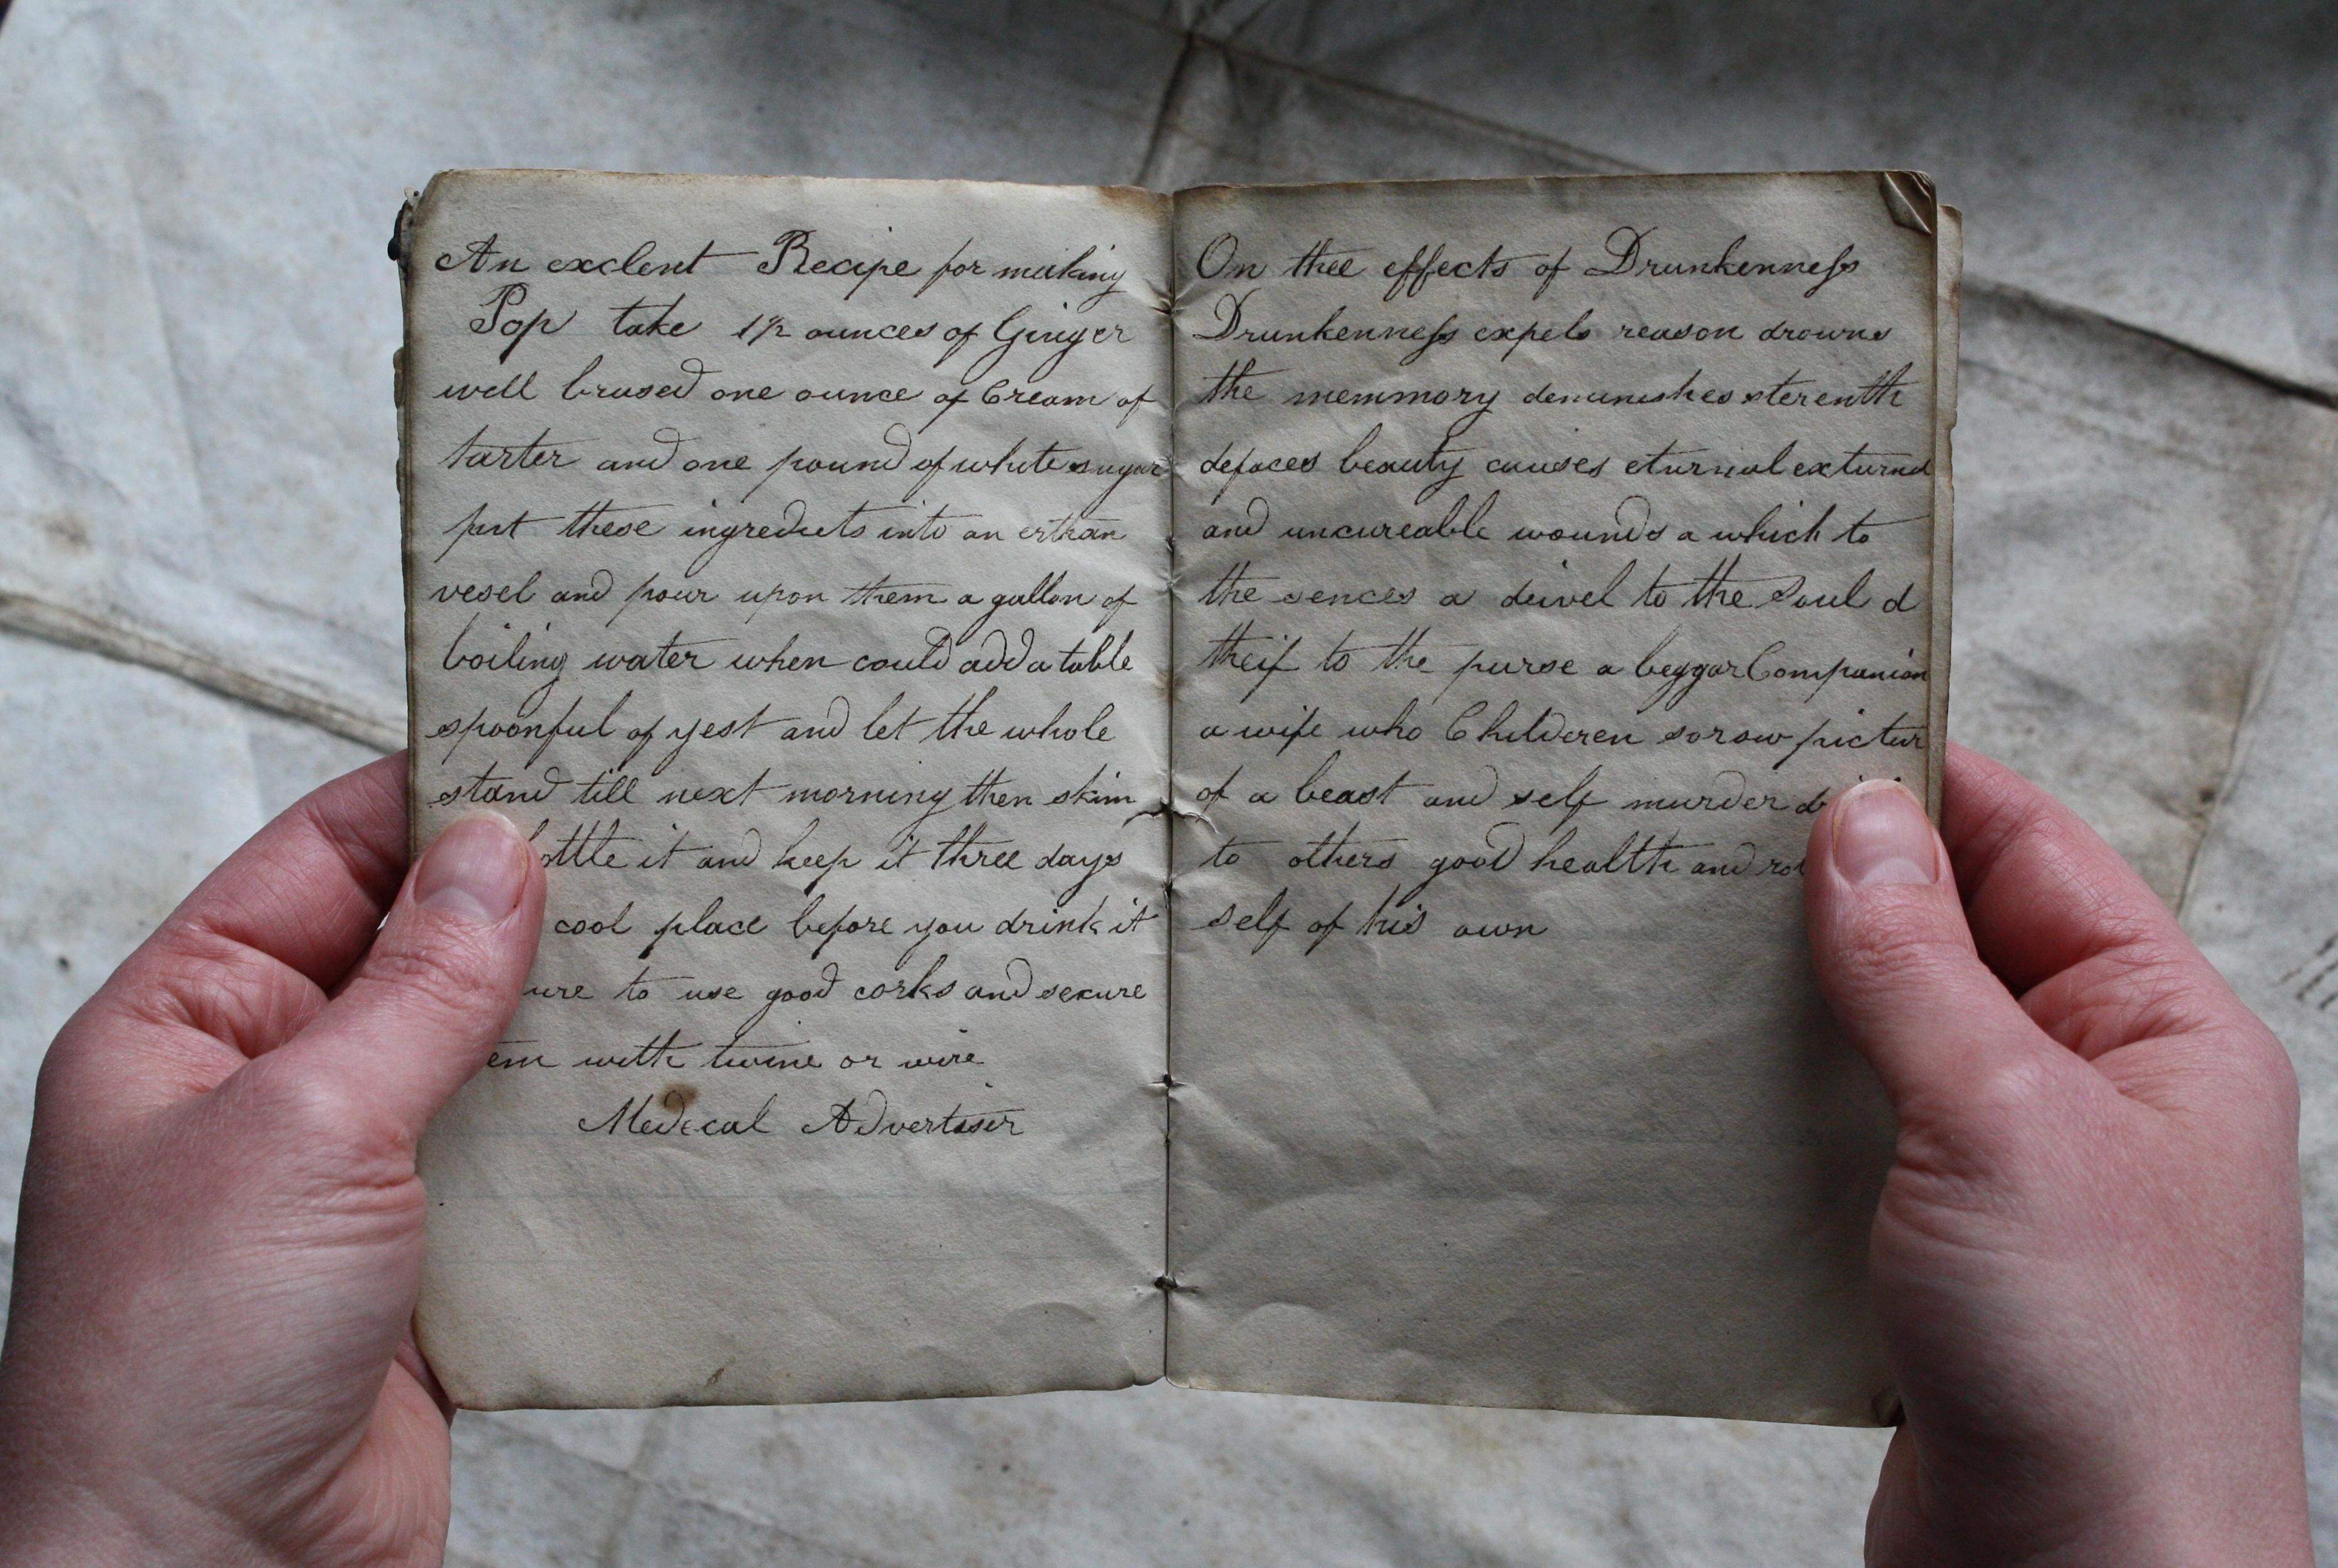 A rather odd hand written journal by Jane Greenwood dated March 19th 1836

The small book contains Epitaphs from graves in Ripley church Yorkshire (see example below), Pannal church, Daned parish church Scotland and Camber church to mention a few.